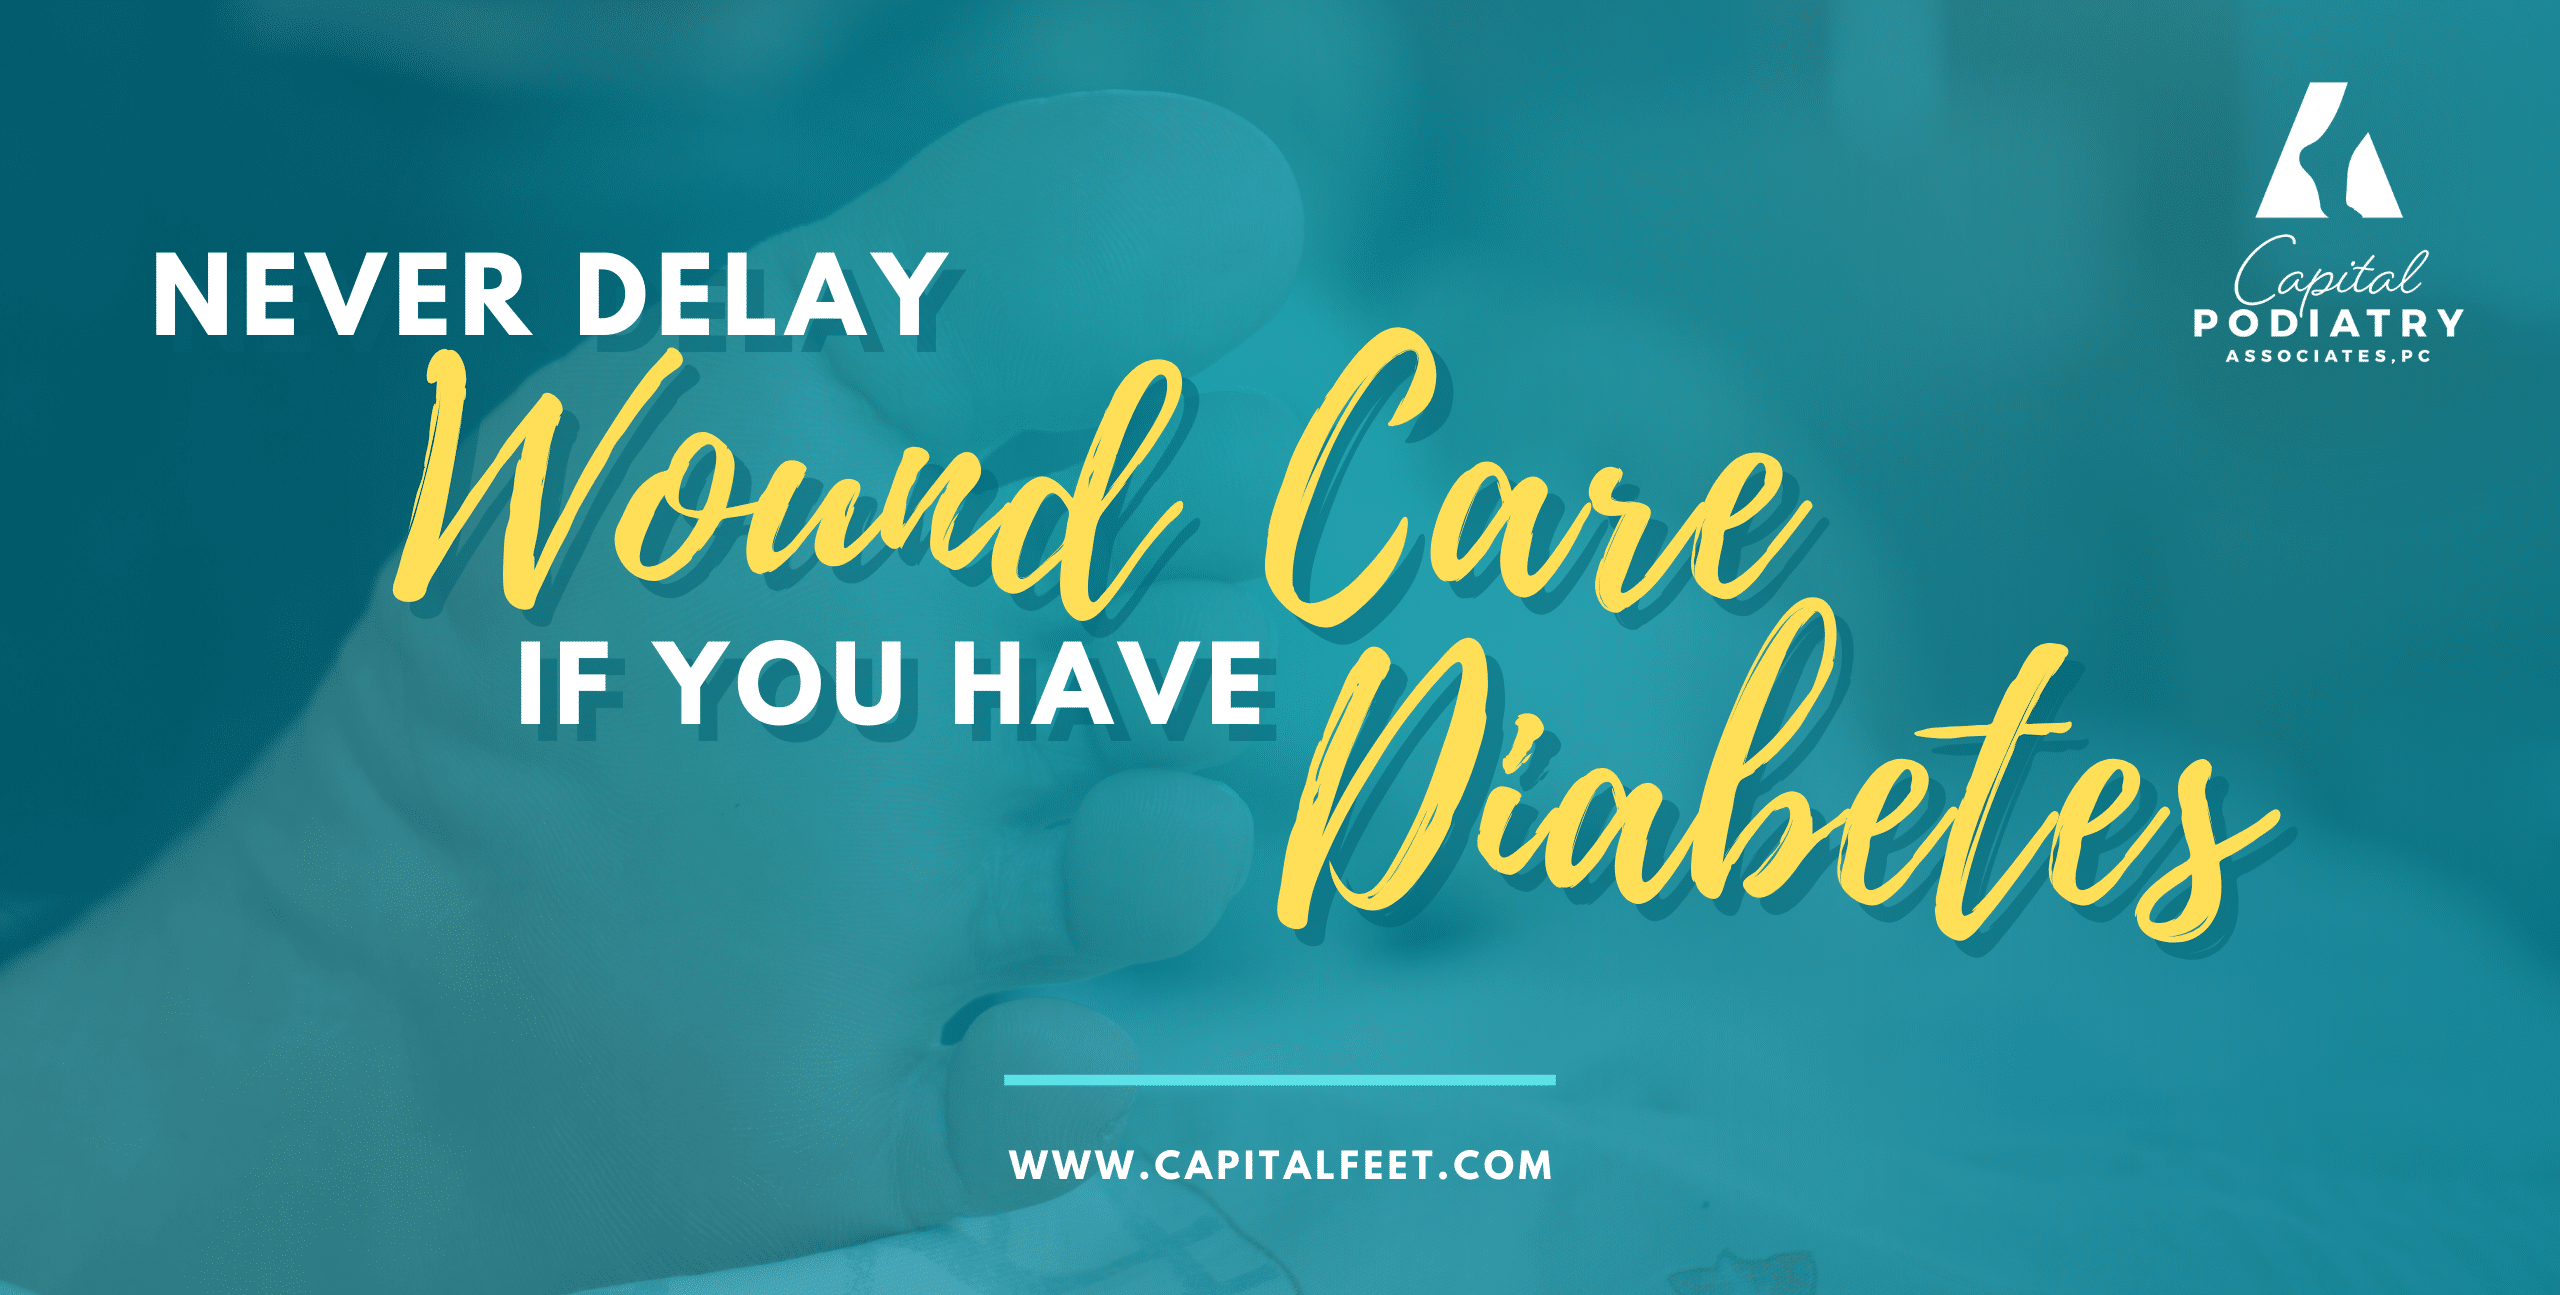 Never delay wound care if you have diabetes